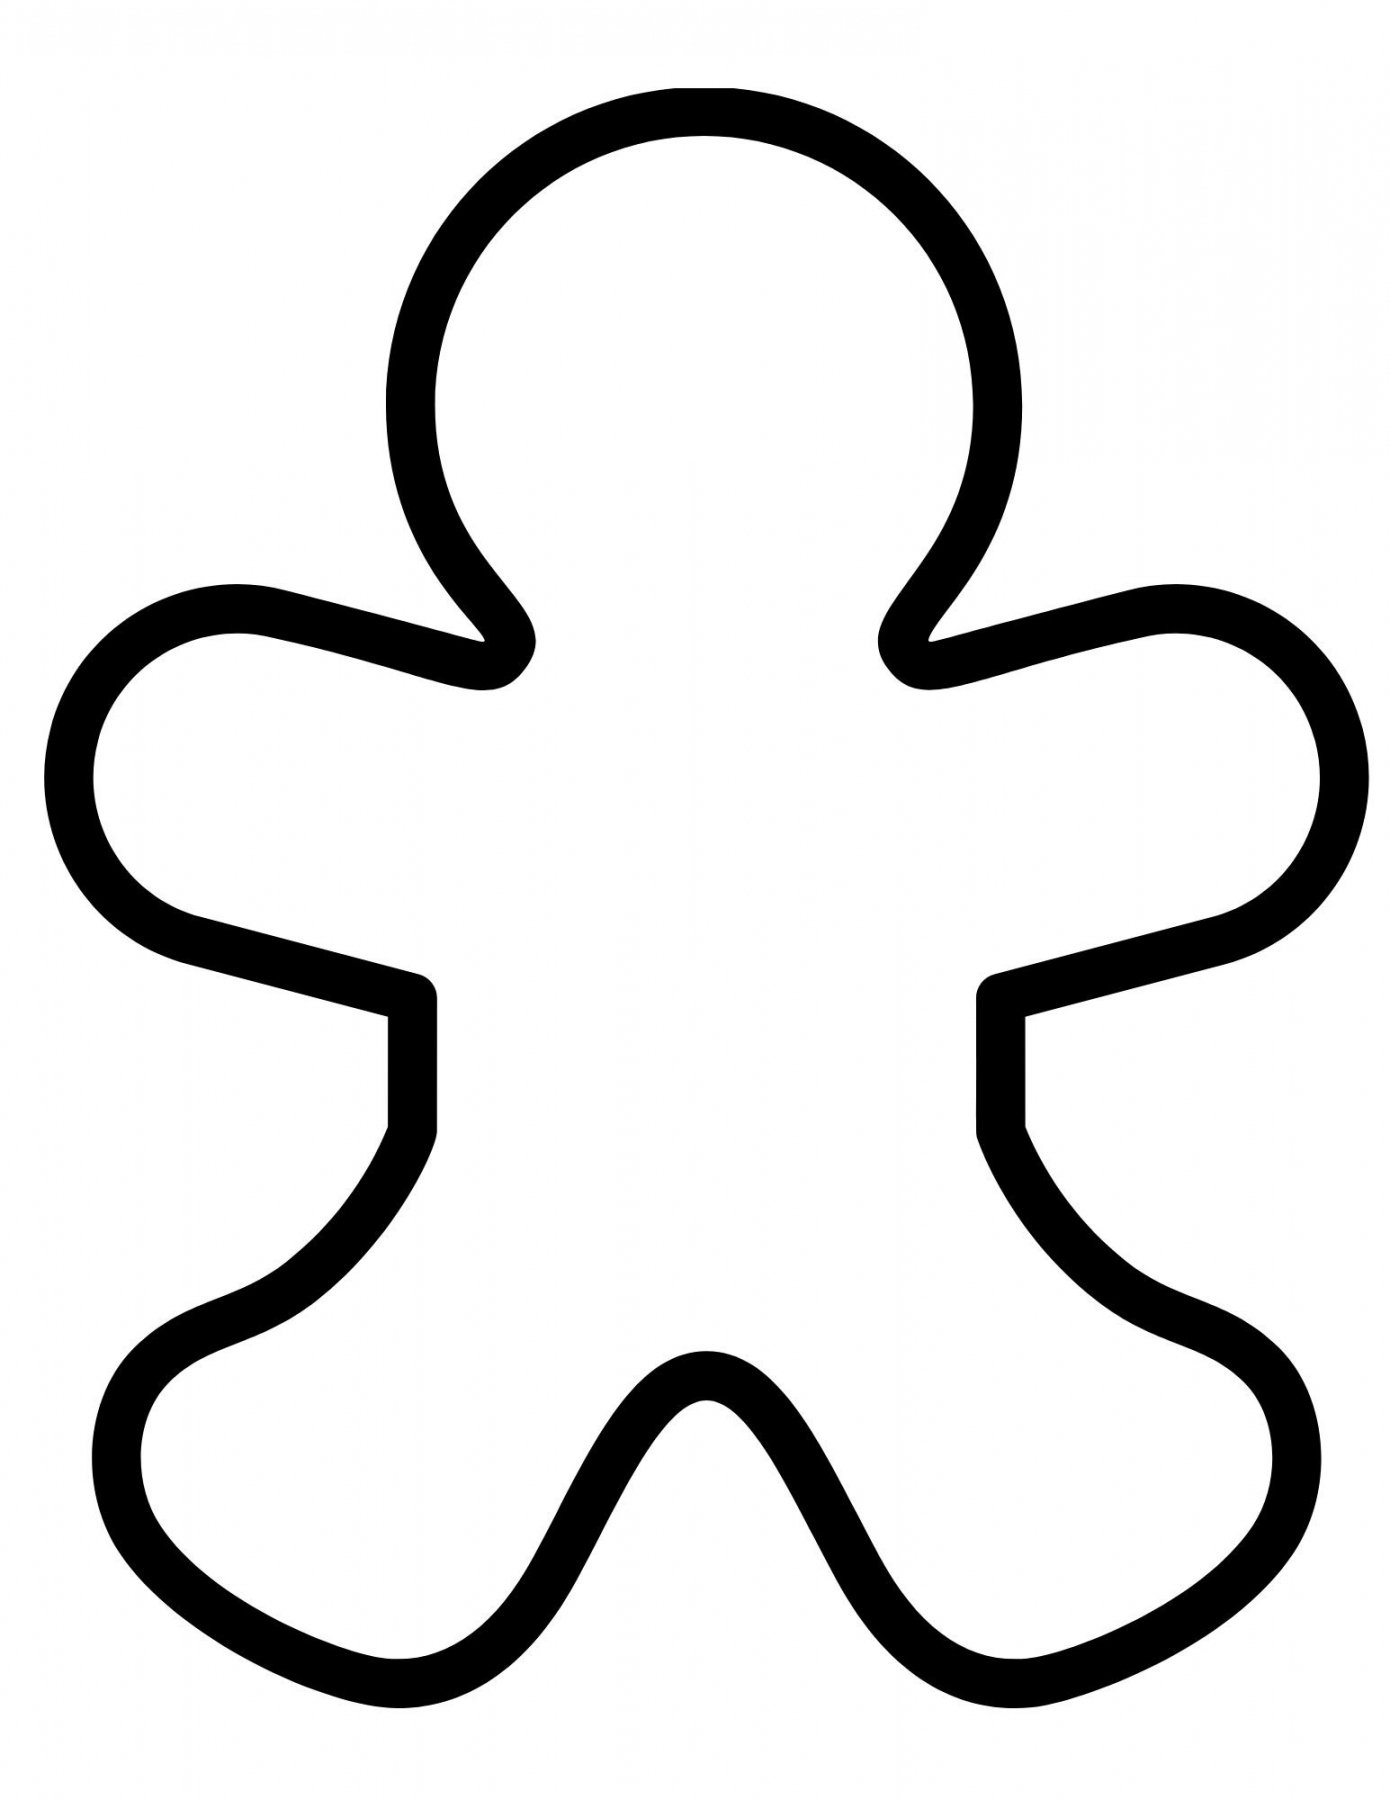 Gingerbread Man Shape Printable - FREE Printables - Gingerbread Man Cut Out